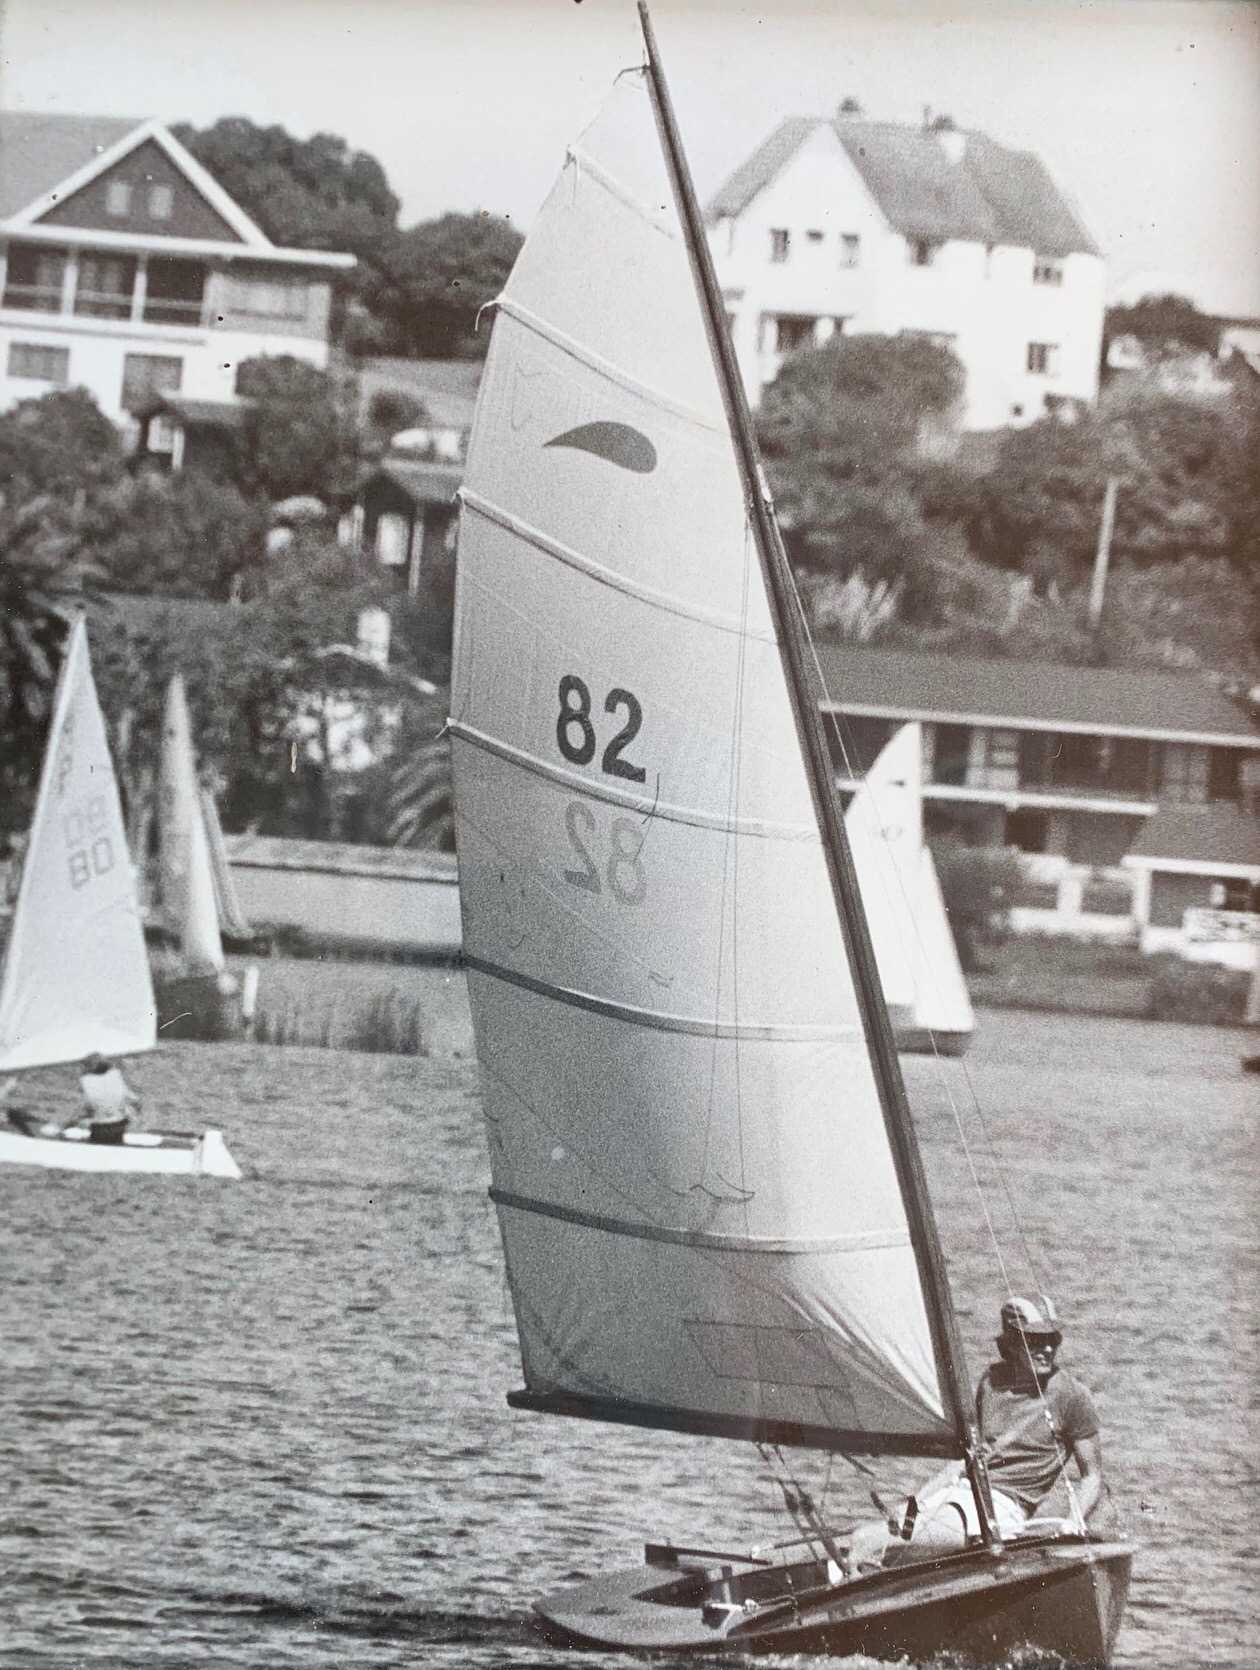 Murray Sargisson in his early thirties racing "Gazelle" #82 on Lake Hamilton in 1982